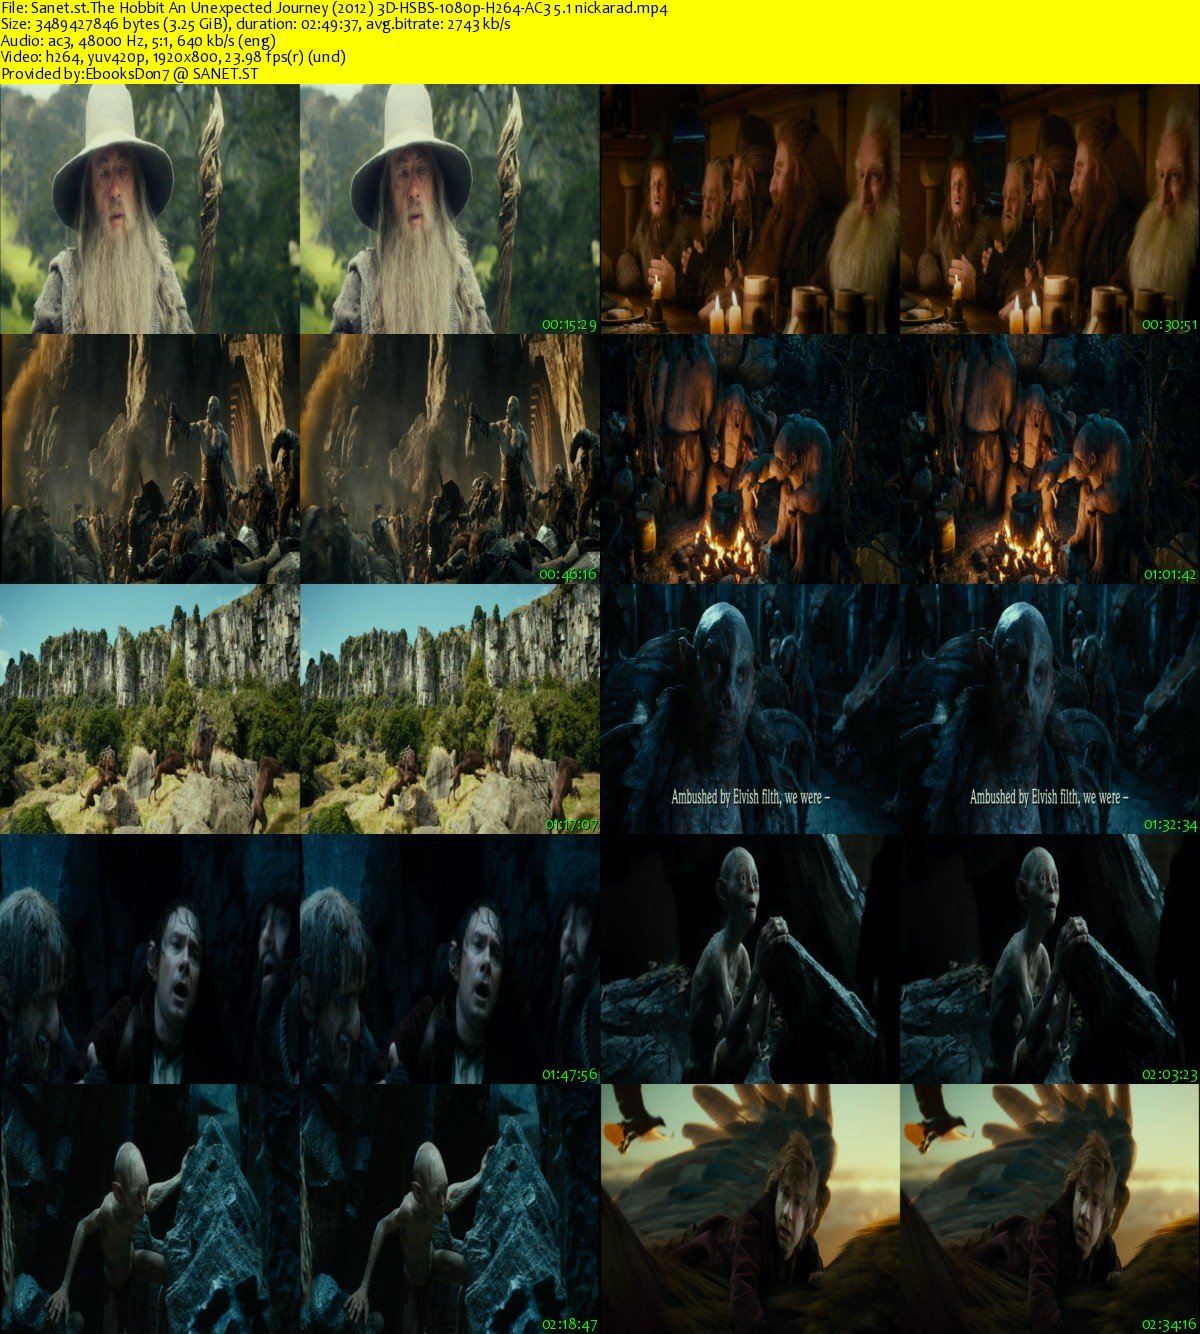 download the new version for iphoneThe Hobbit: An Unexpected Journey